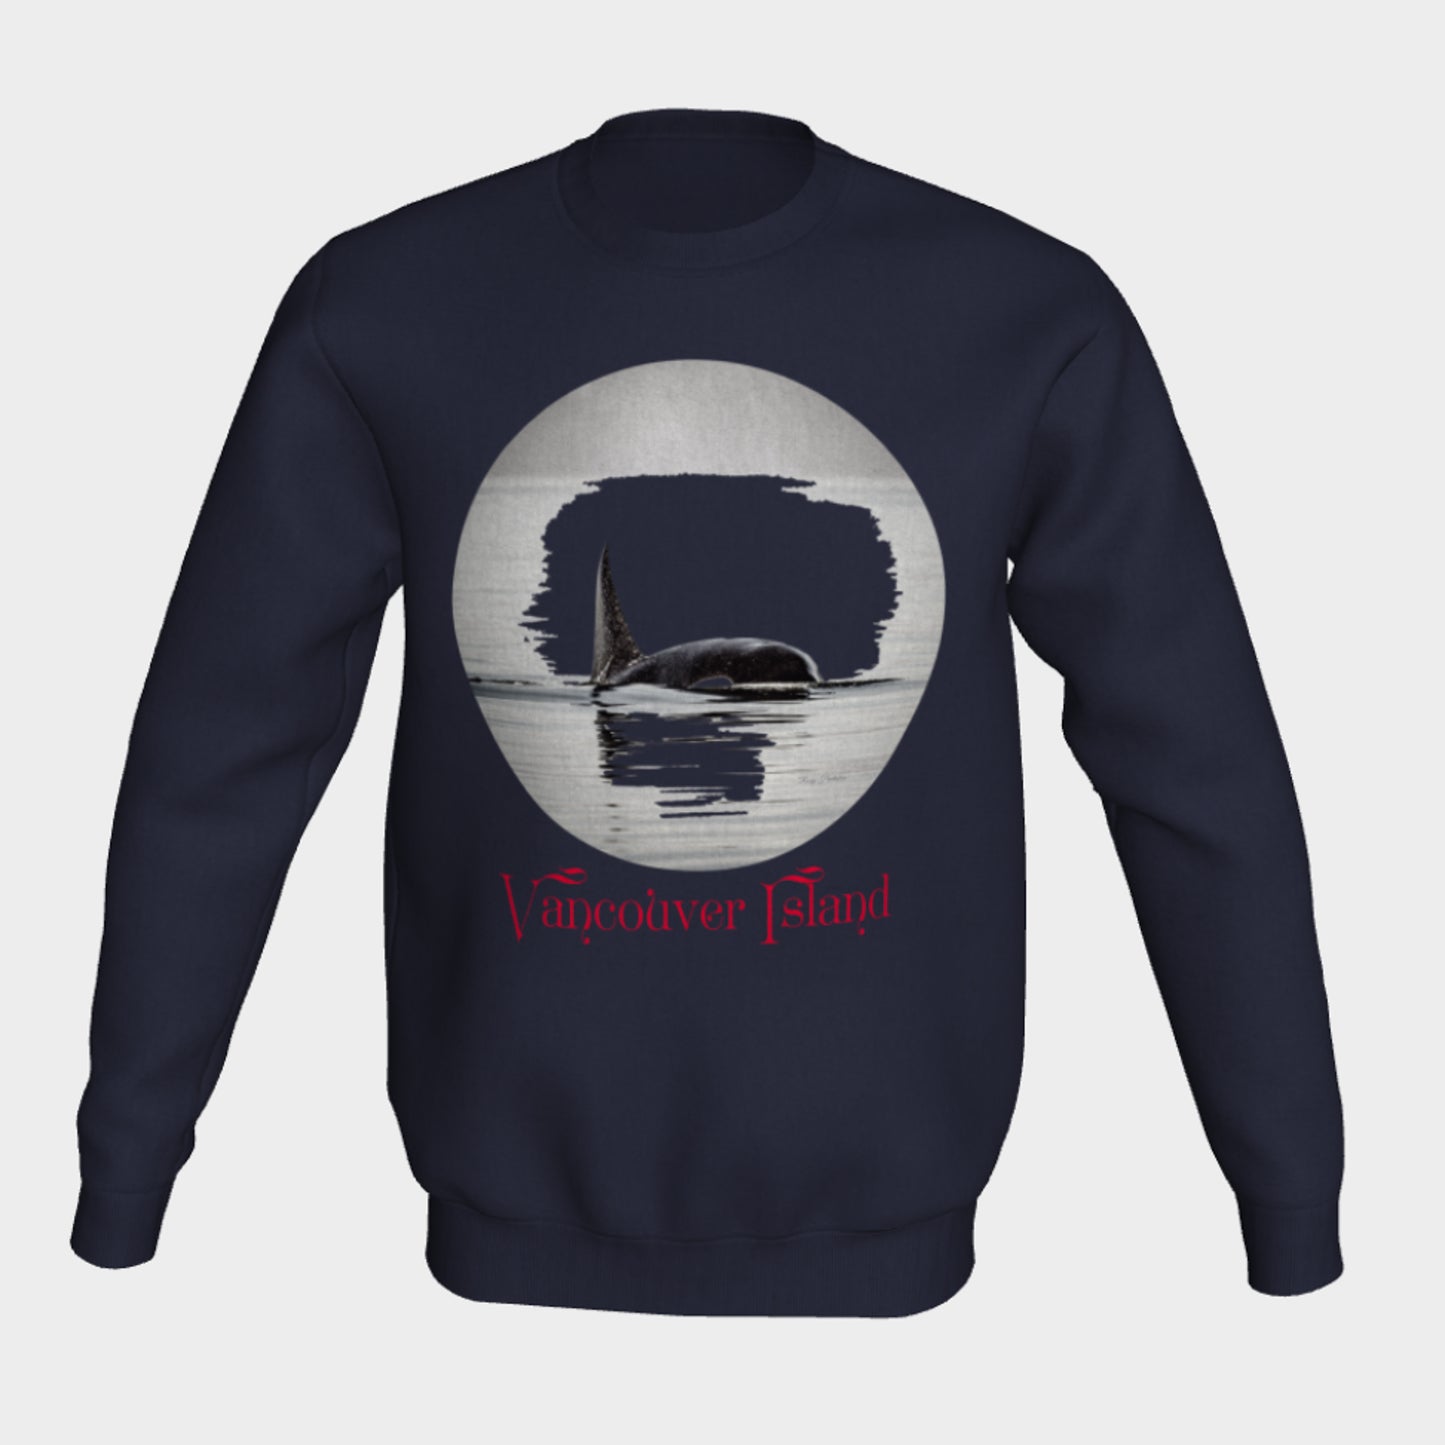 Orca Spray Vancouver Island Crewneck Sweatshirt What’s better than a super cozy sweatshirt? A super cozy sweatshirt from Van Isle Goddess!  Super cozy unisex sweatshirt for those chilly days.  Excellent for men or women.   Fit is roomy and comfortable. 